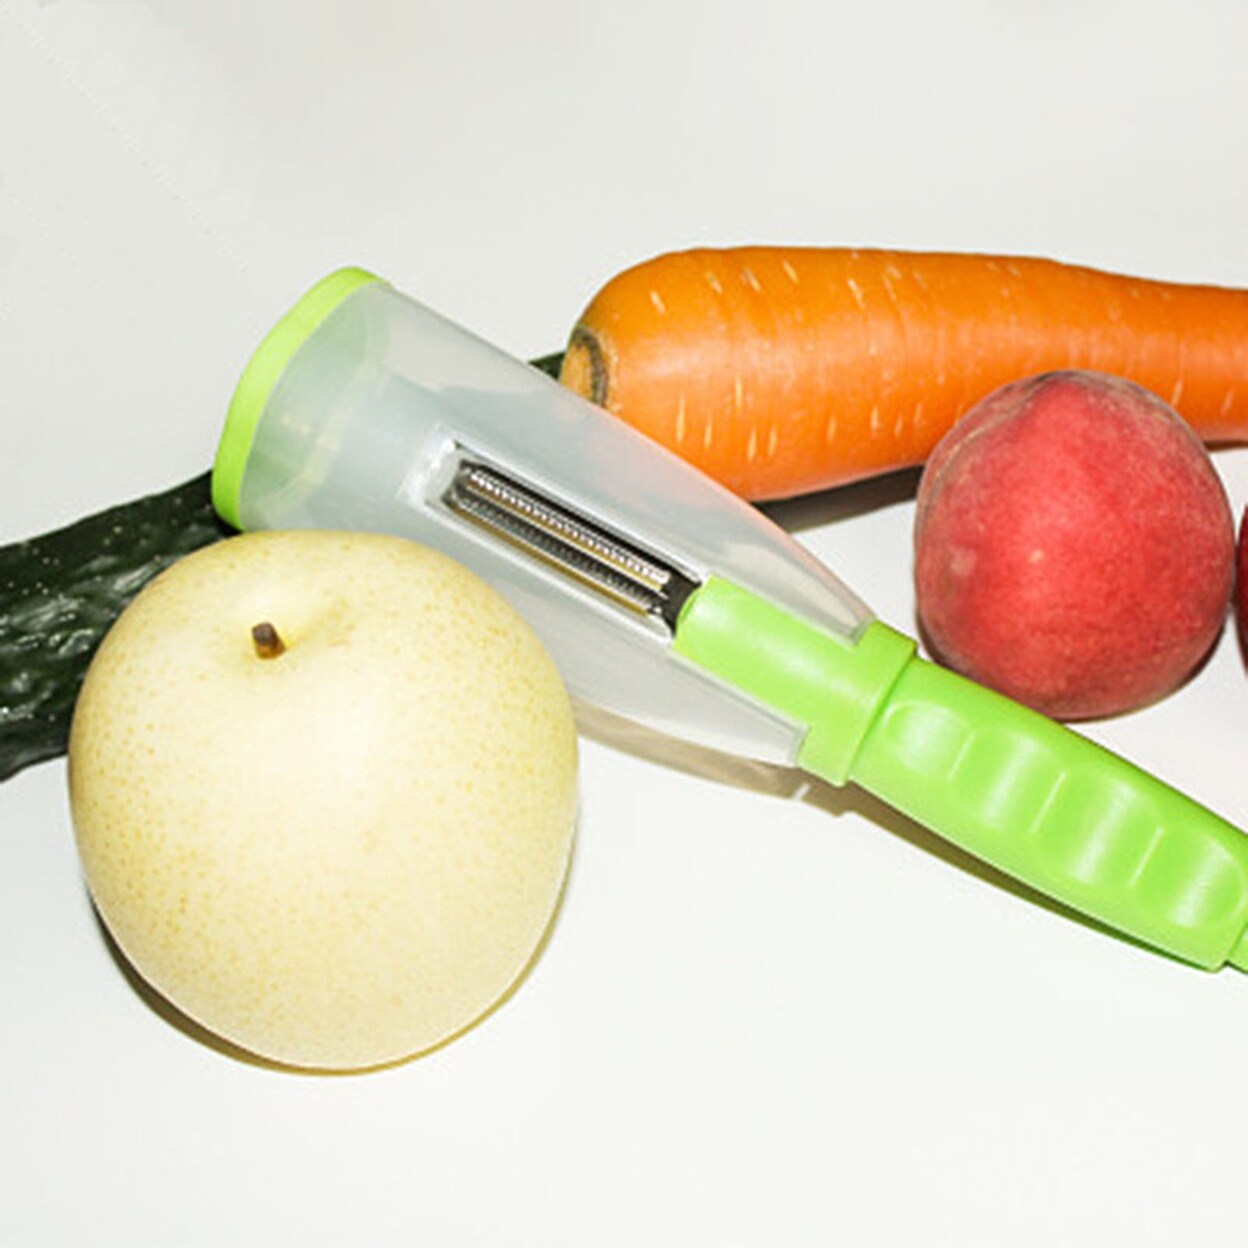 https://ak1.ostkcdn.com/images/products/is/images/direct/e94e122a5a794790b0bc72d8e595fd4e91e7506a/Abs-Fruit-Vegetable-Peeler-Home-Multifunctional-Kitchen-Tool-With-Storage-Tube.jpg